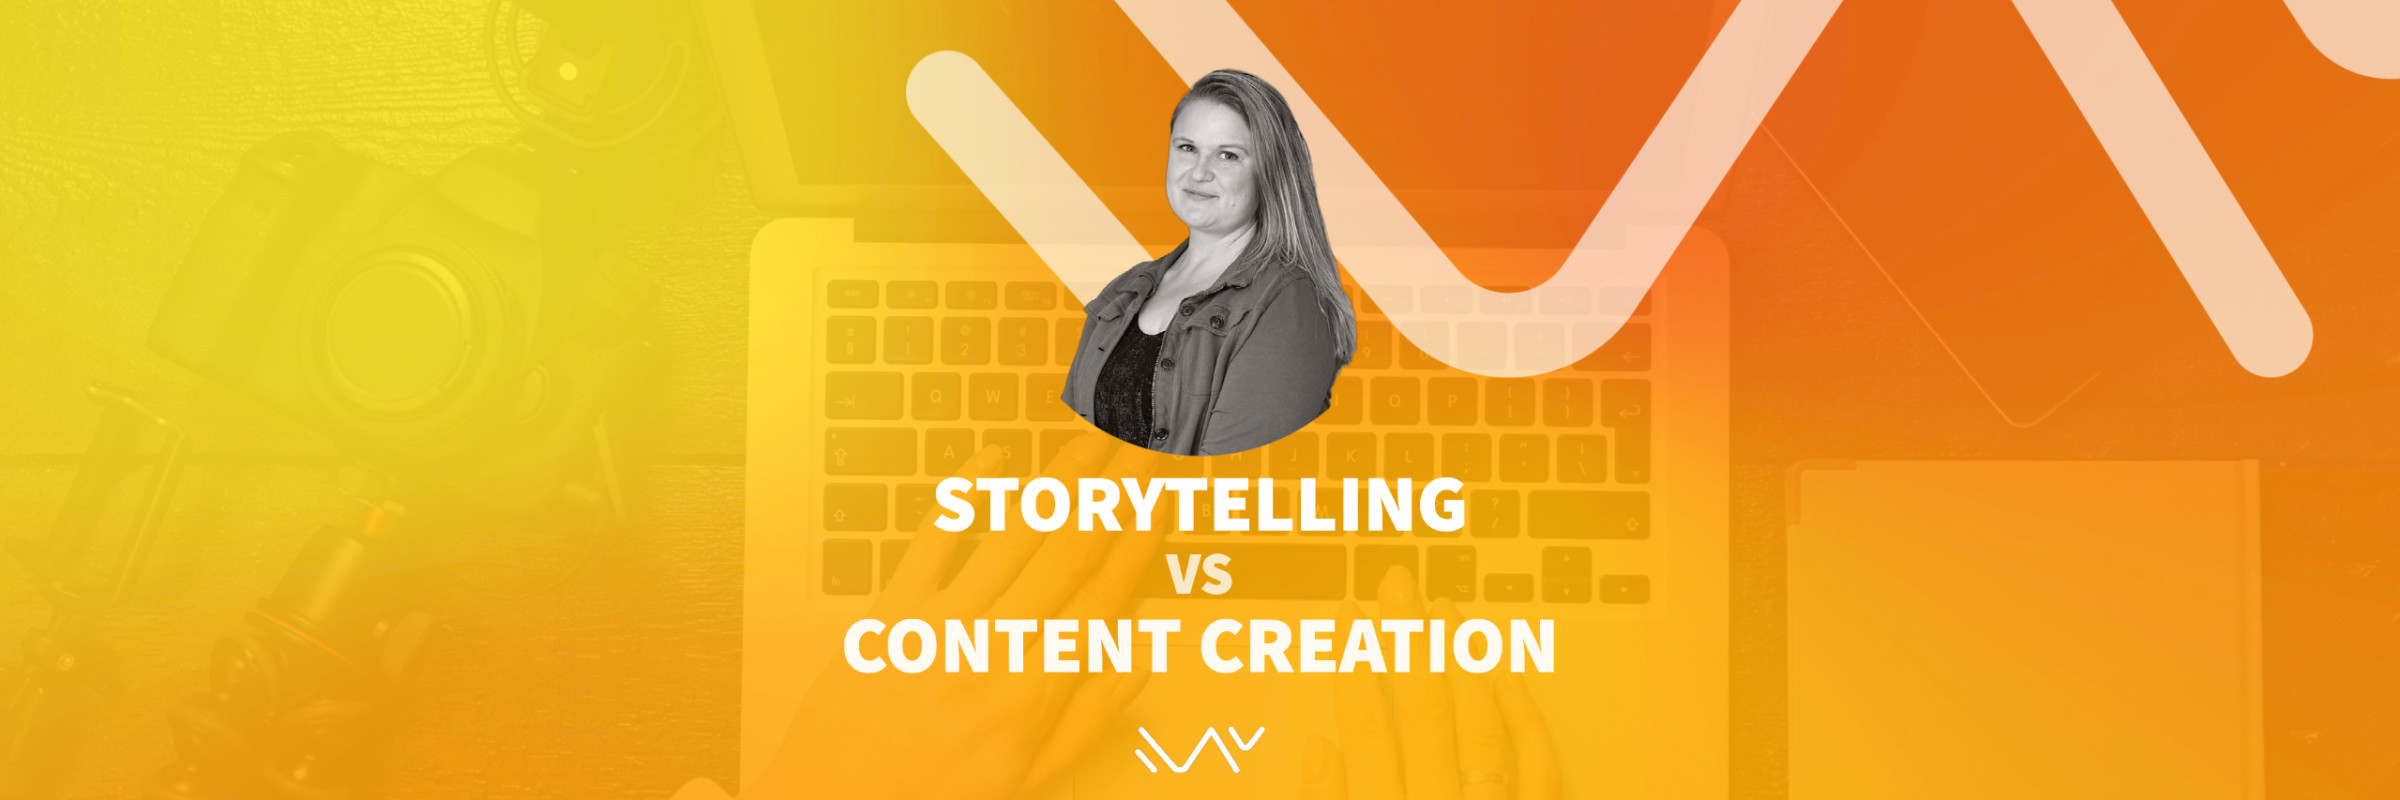 Storytelling vs. Content Creation